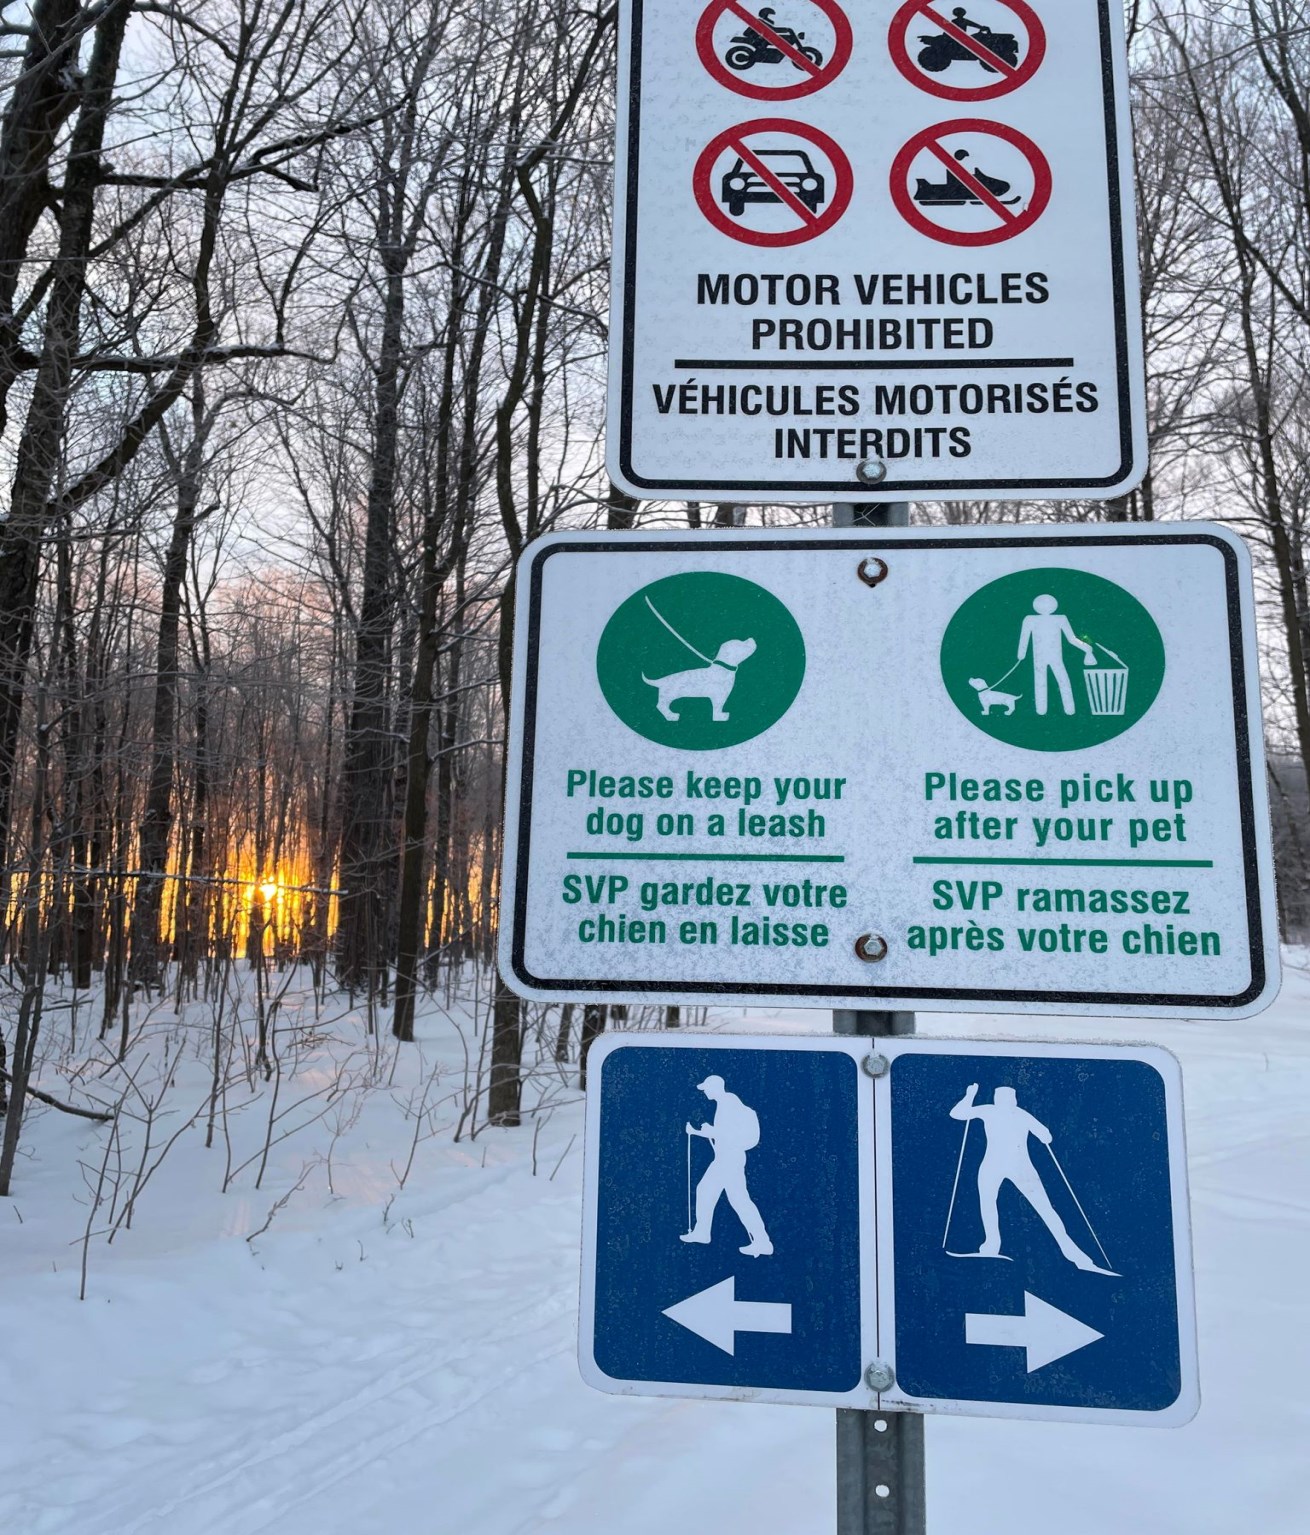 Sign indicating dogs must be on leash and requesting people to pick up after their pets